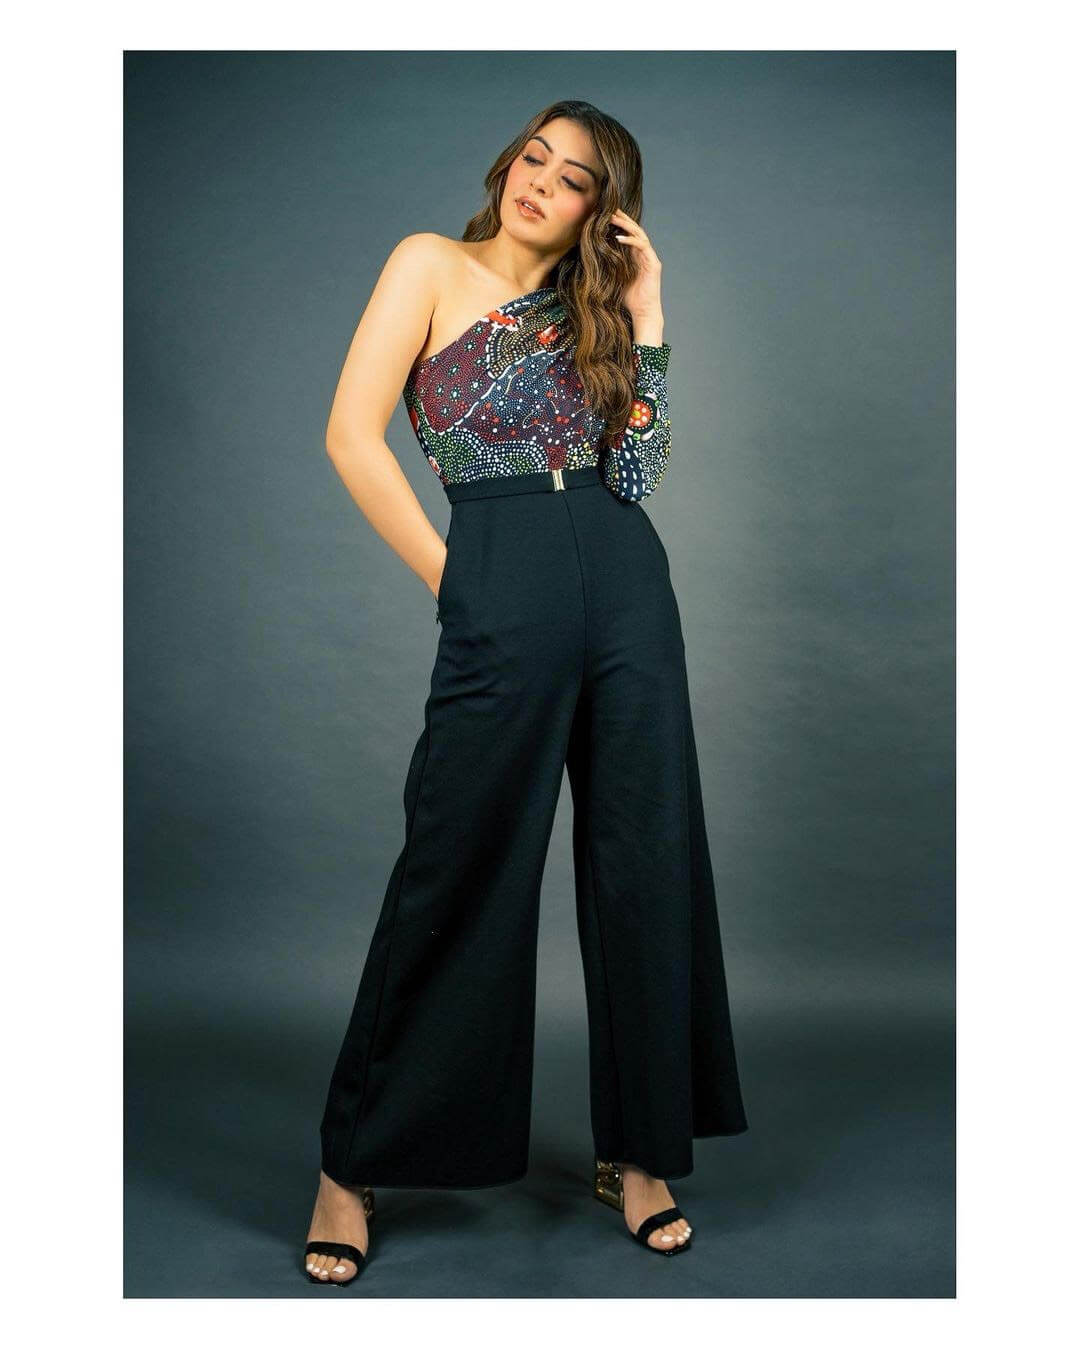 Hansika Motwani Tempting Ethnical Looks And Outfits - K4 Fashion